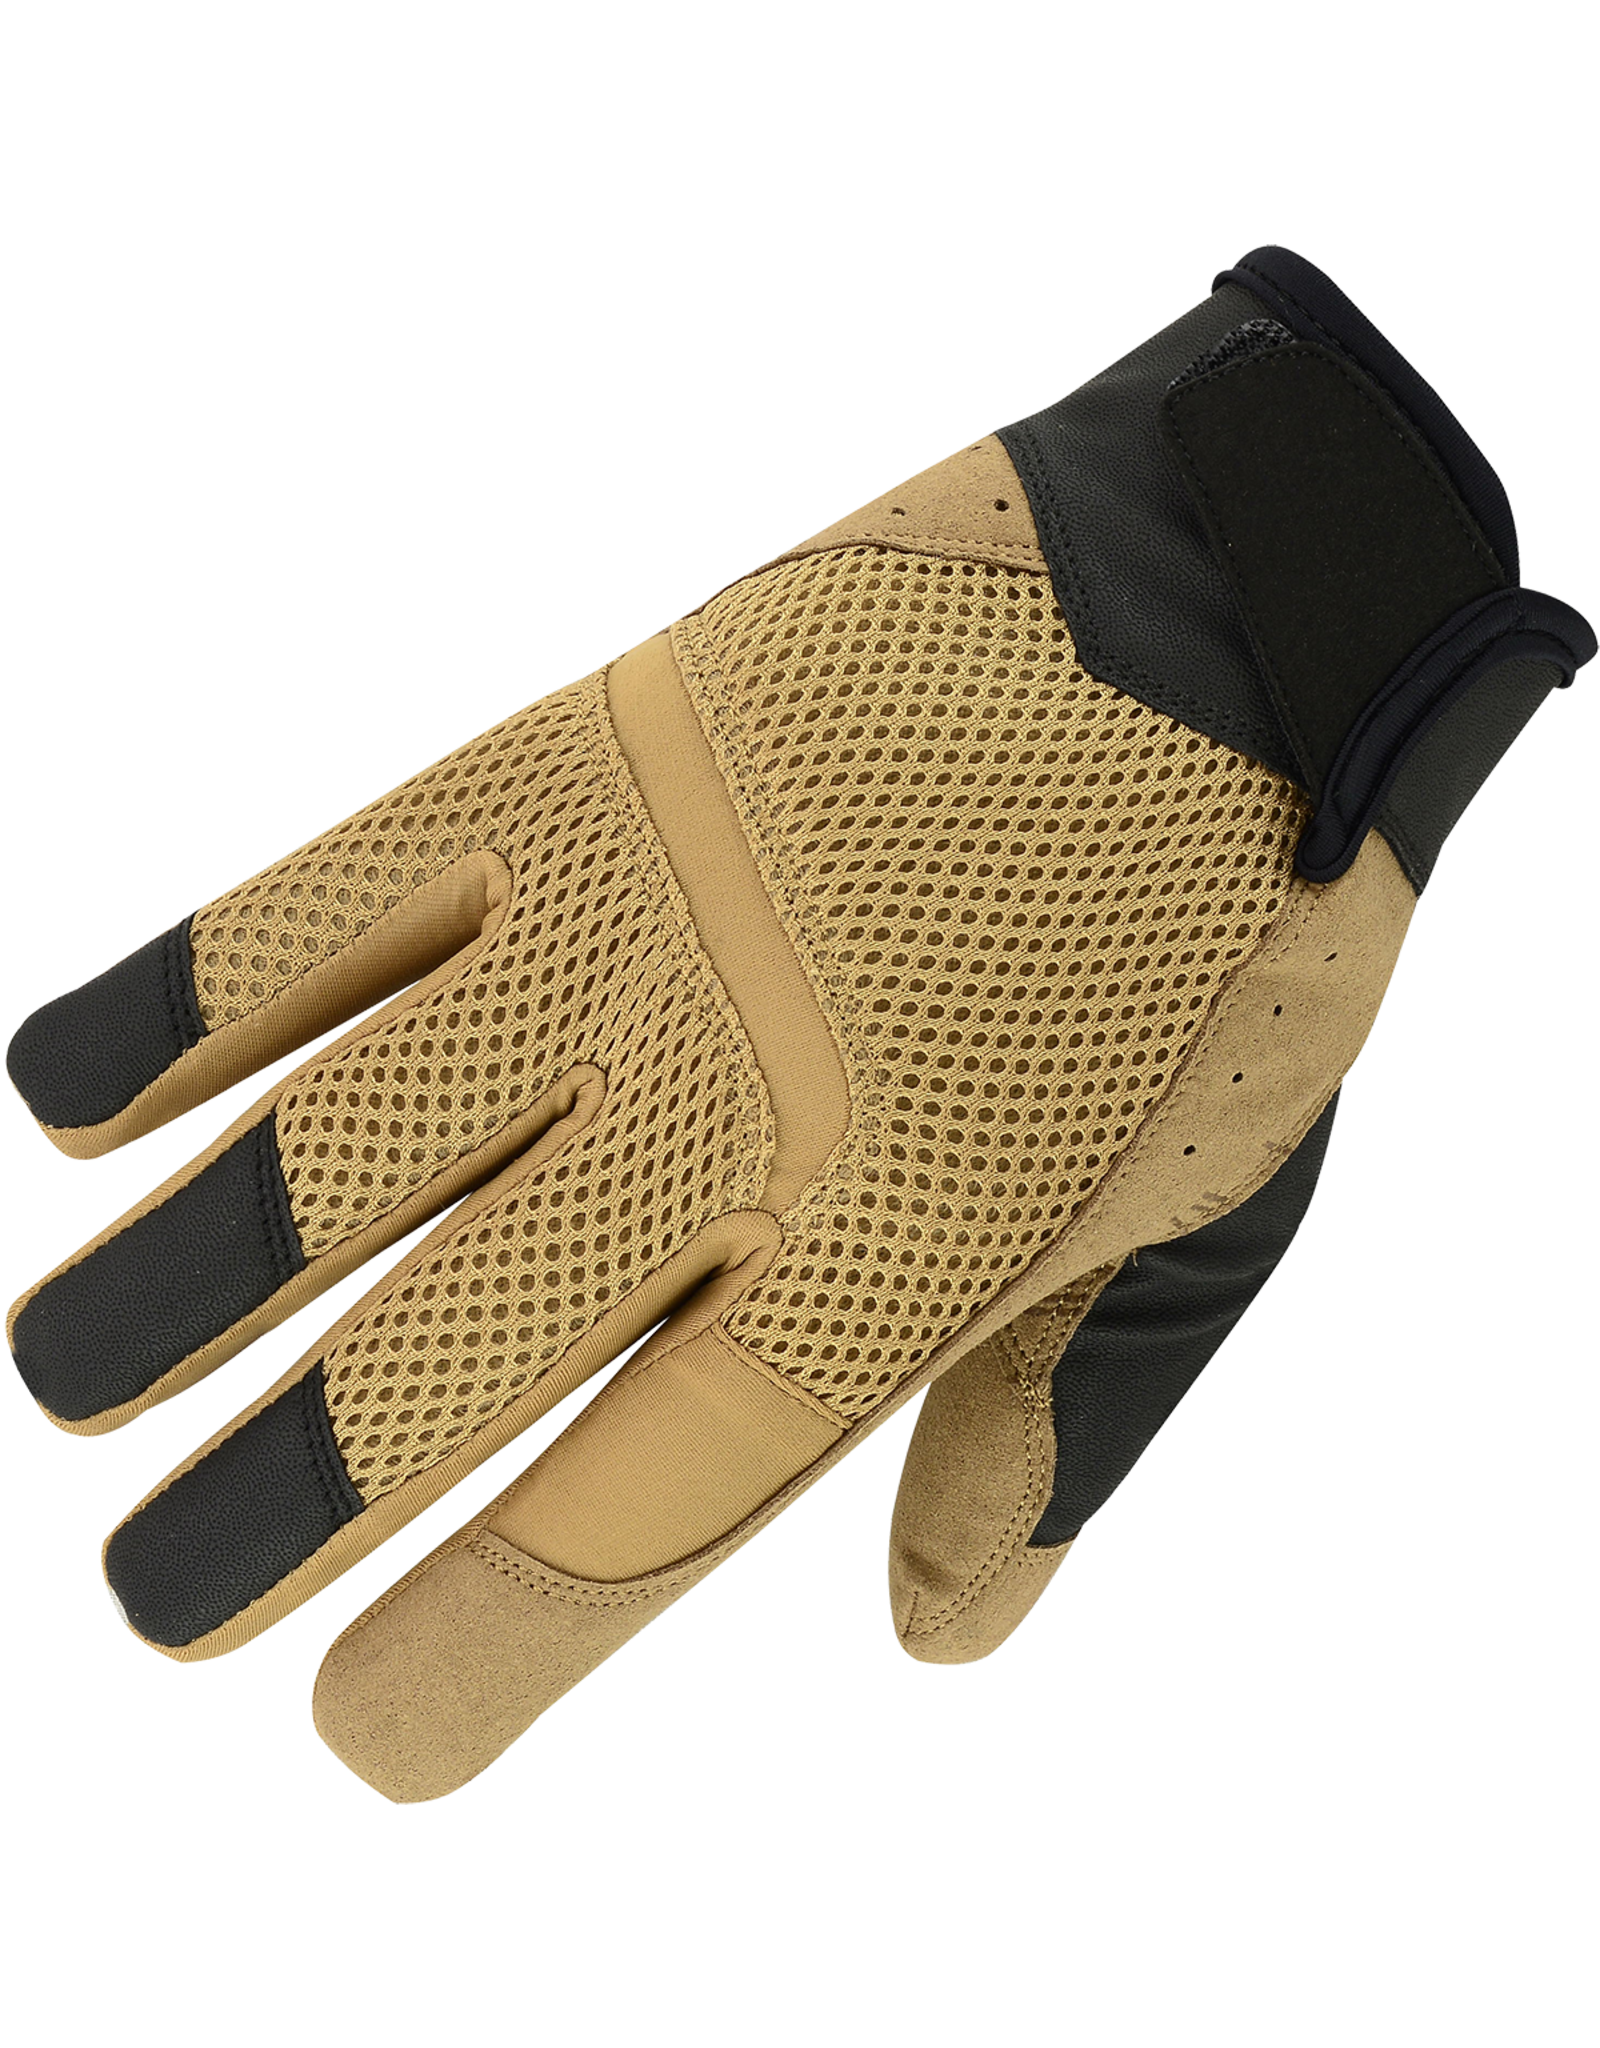 SHADOW STRATEGIC TACTICAL SHOOTING GLOVES